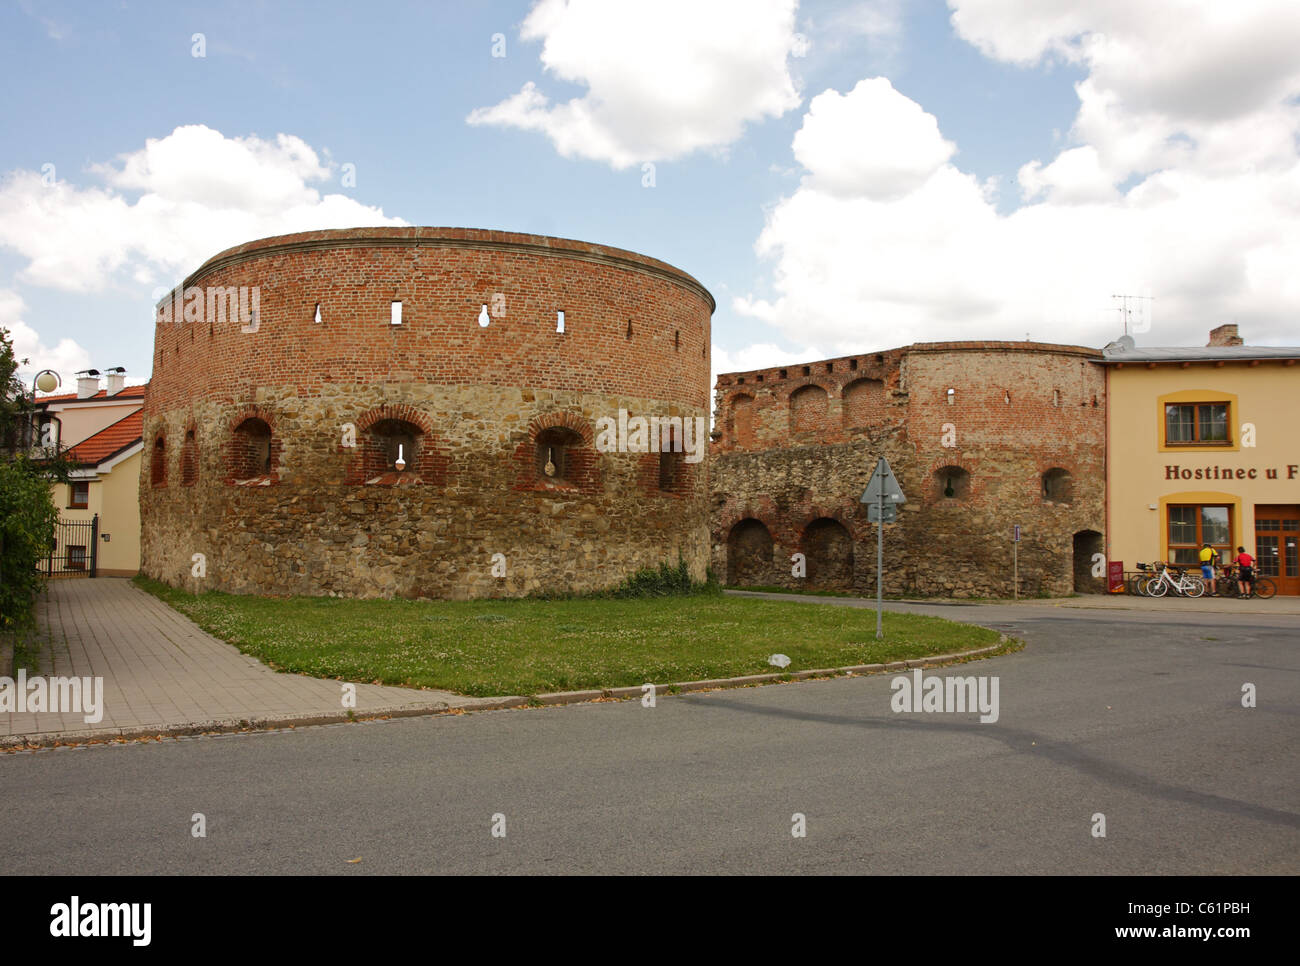 Old city walls in Straznice, Czech Republic Stock Photo